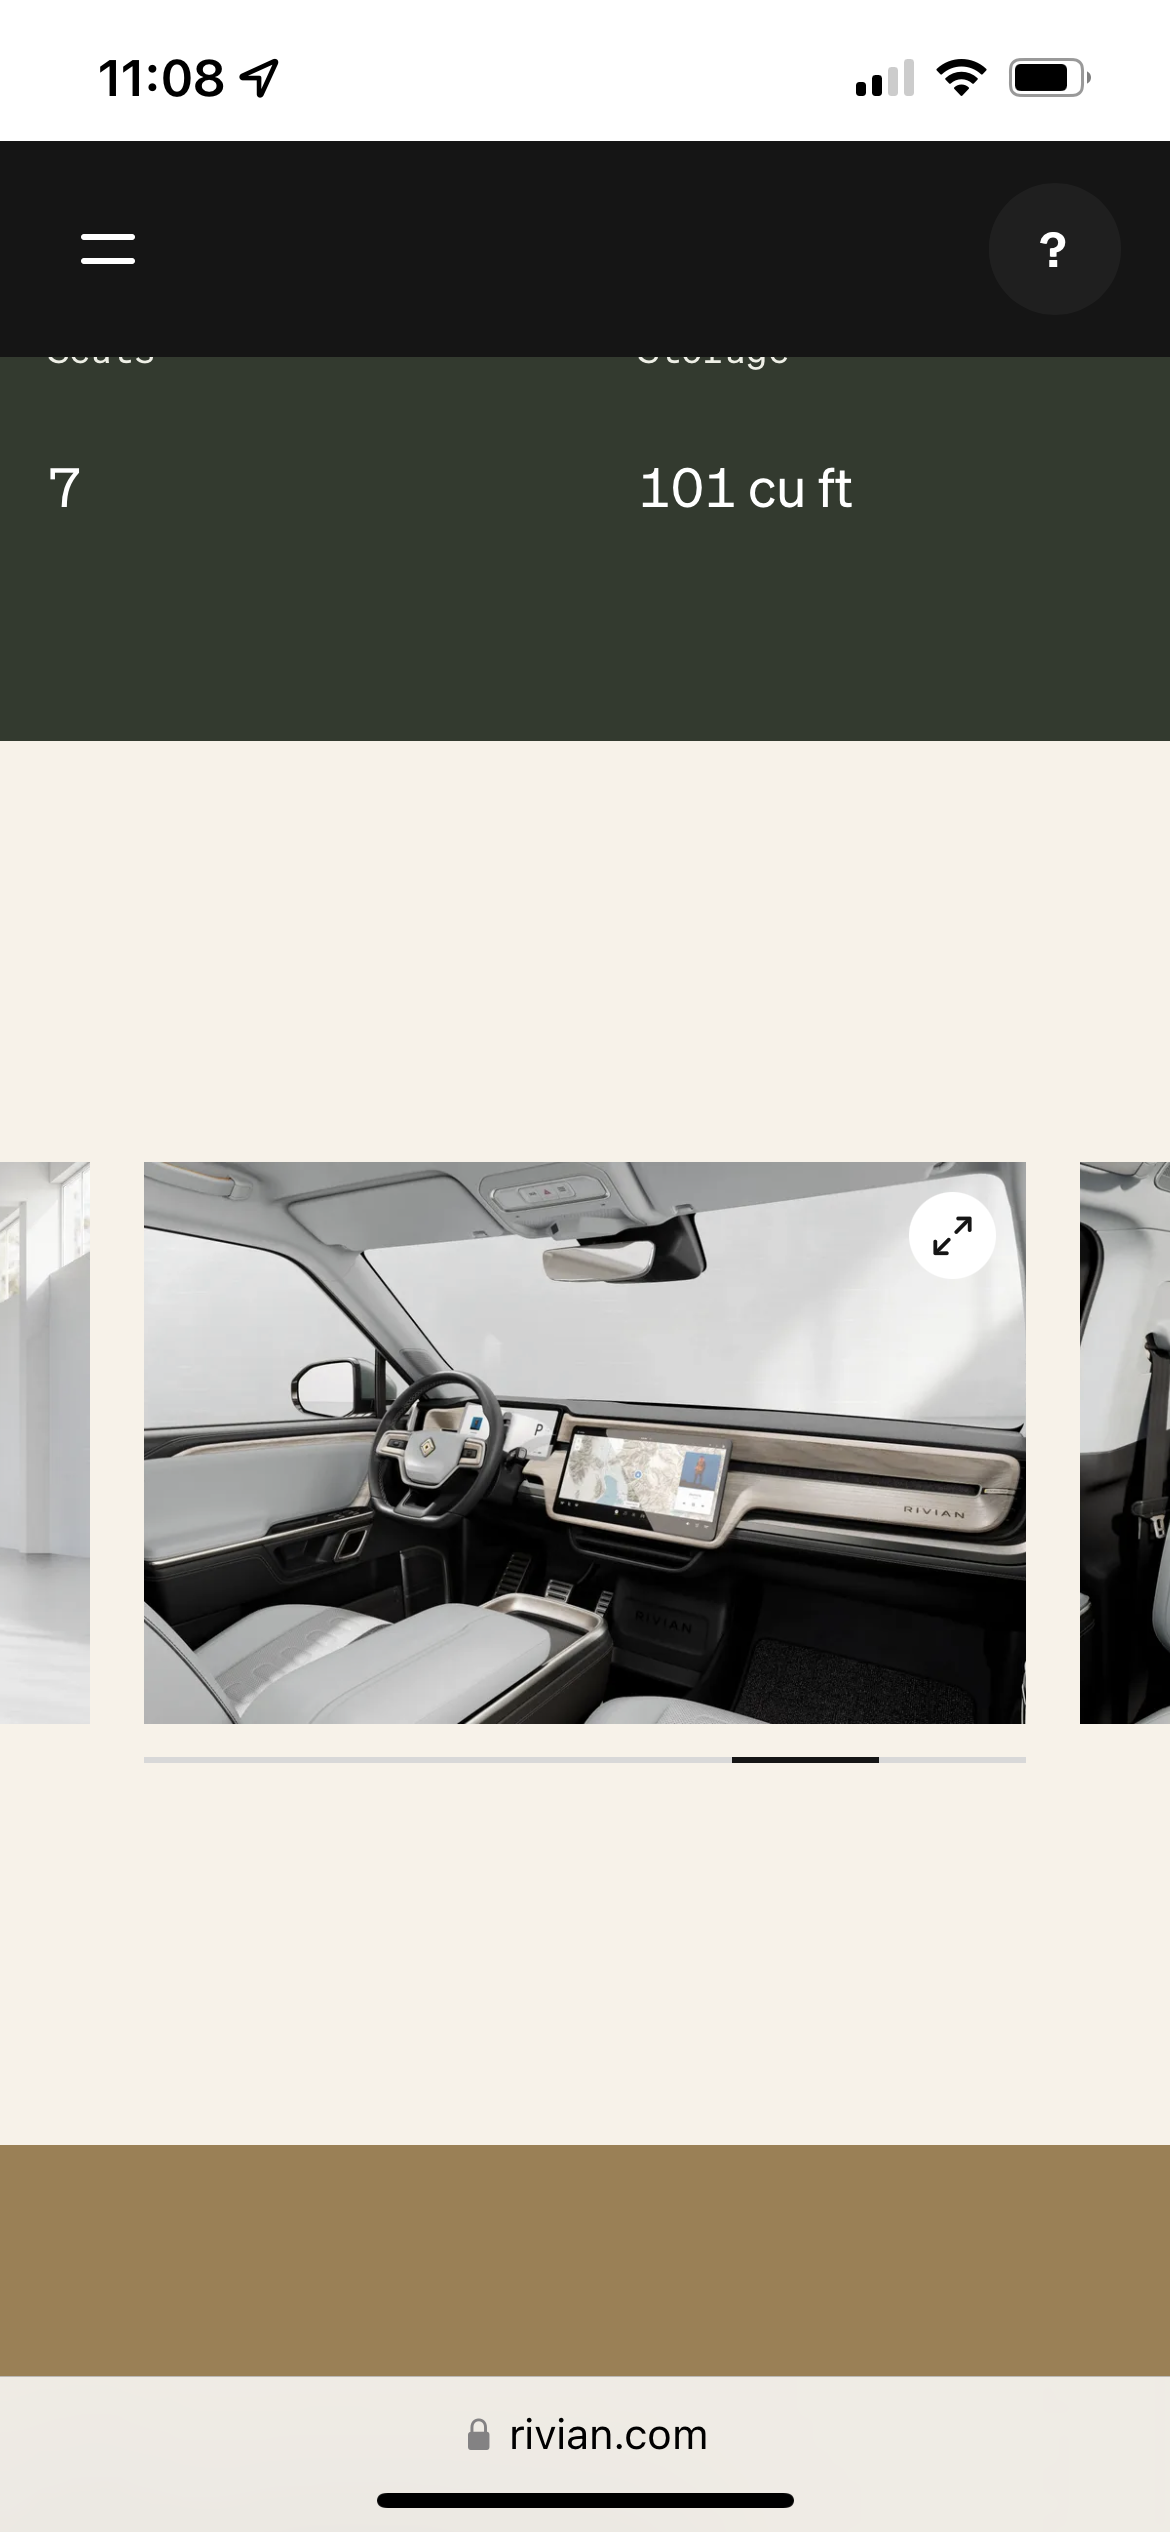 Rivian R1T R1S [Update: Official look at new OC interior w/ dark-stained ash wood] Ocean Coast with BM wood trim are shipping soon according to service center guide FE7B423B-E473-4F2F-BCB3-6CA521B41572